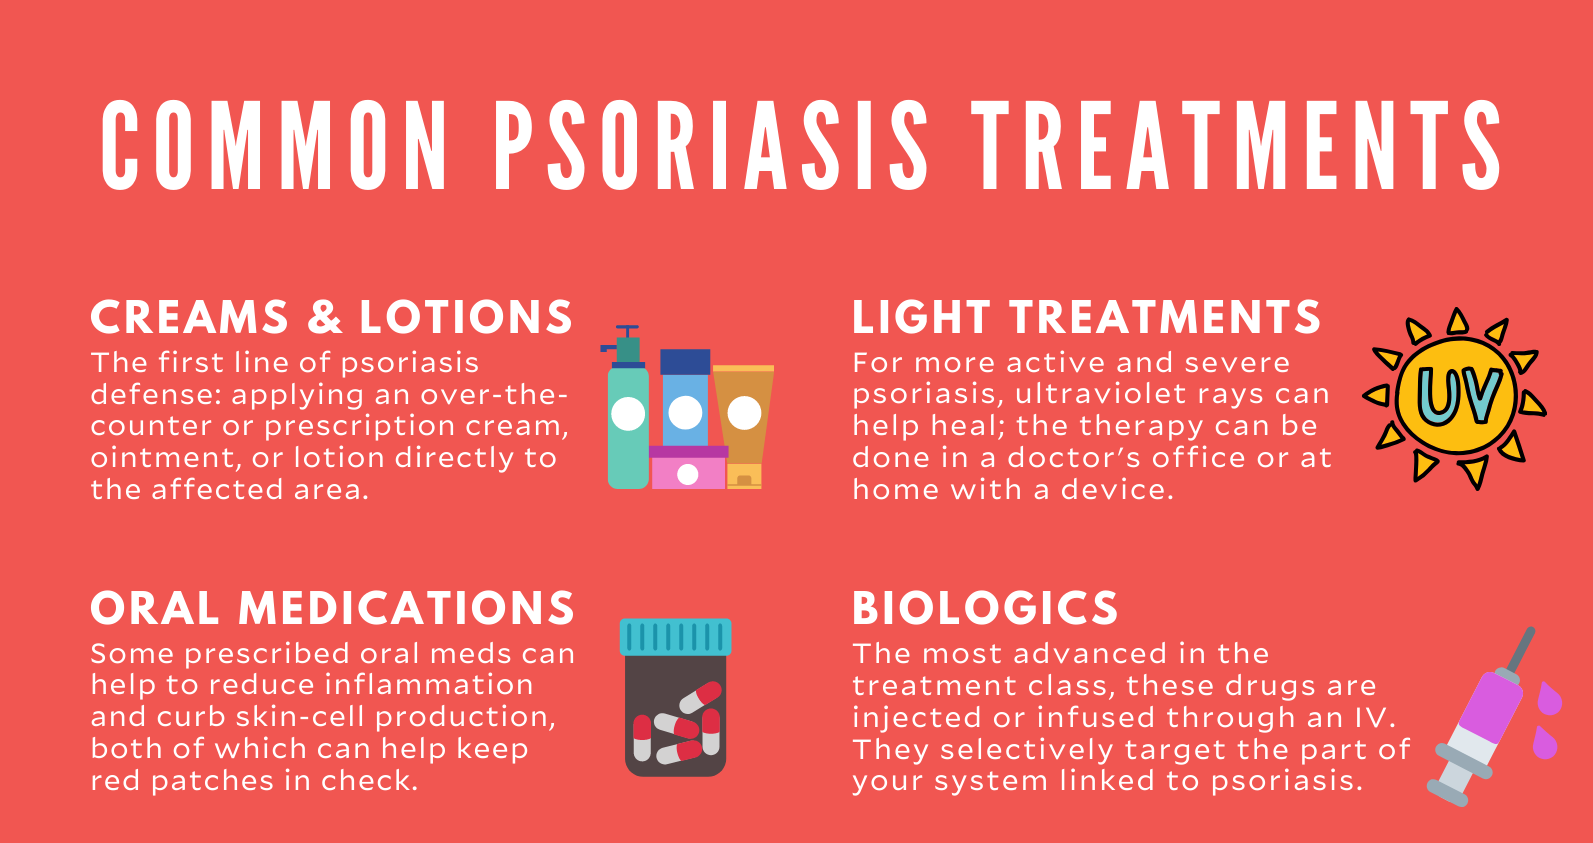 Best Psoriasis Treatment in Mumbai at Affordable Price Cost India by Dr Rinky Kapoor at The Esthetic Clinics